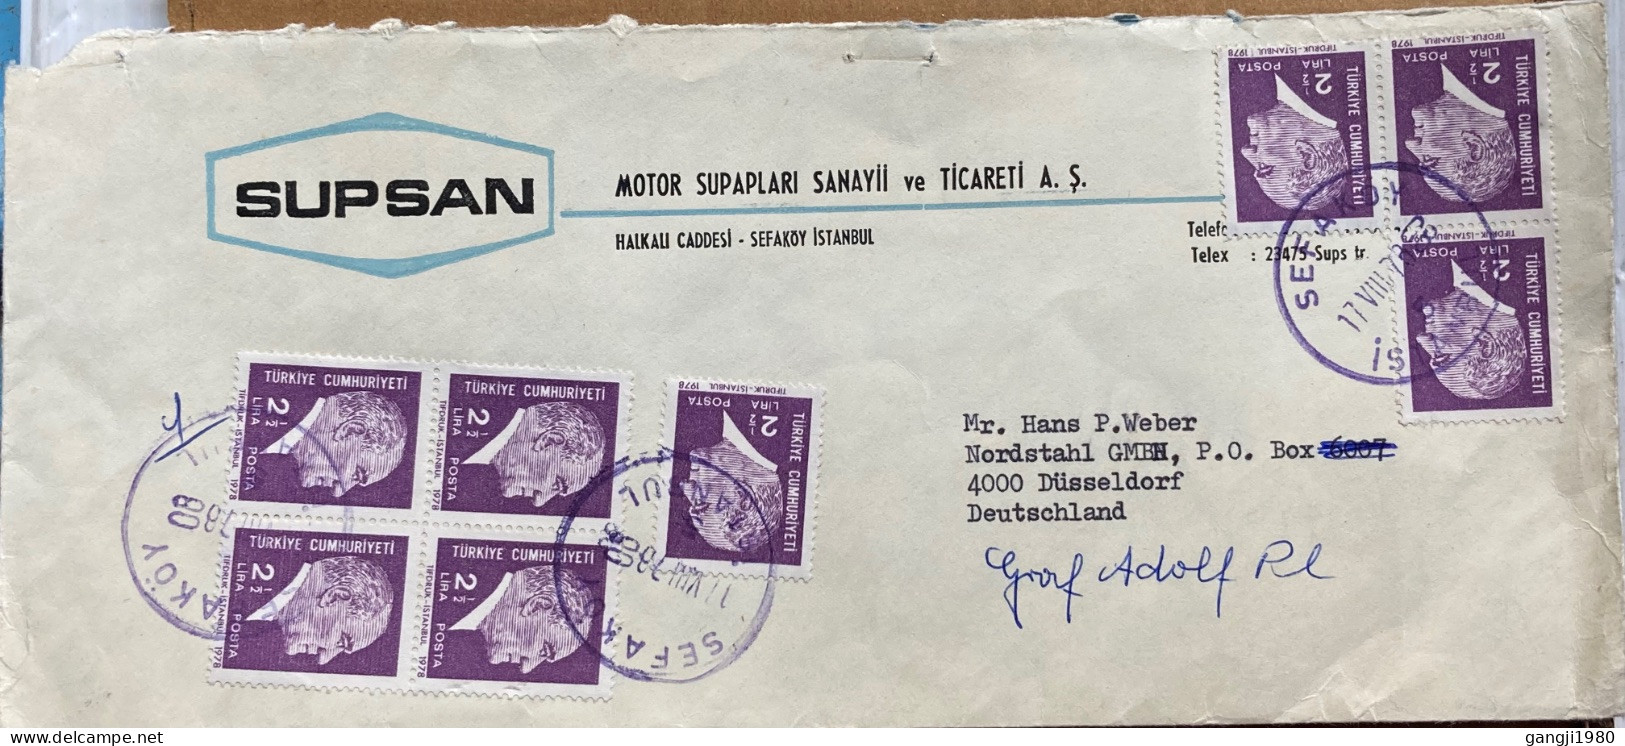 TURKEY TO GERMANY 1978, ADVERTISING COVER USED, RARE SHIPMENT NOTICE HAND STAMP BACKSIDE, SUPSAN MOTAR ENGINE VALVES IND - Storia Postale